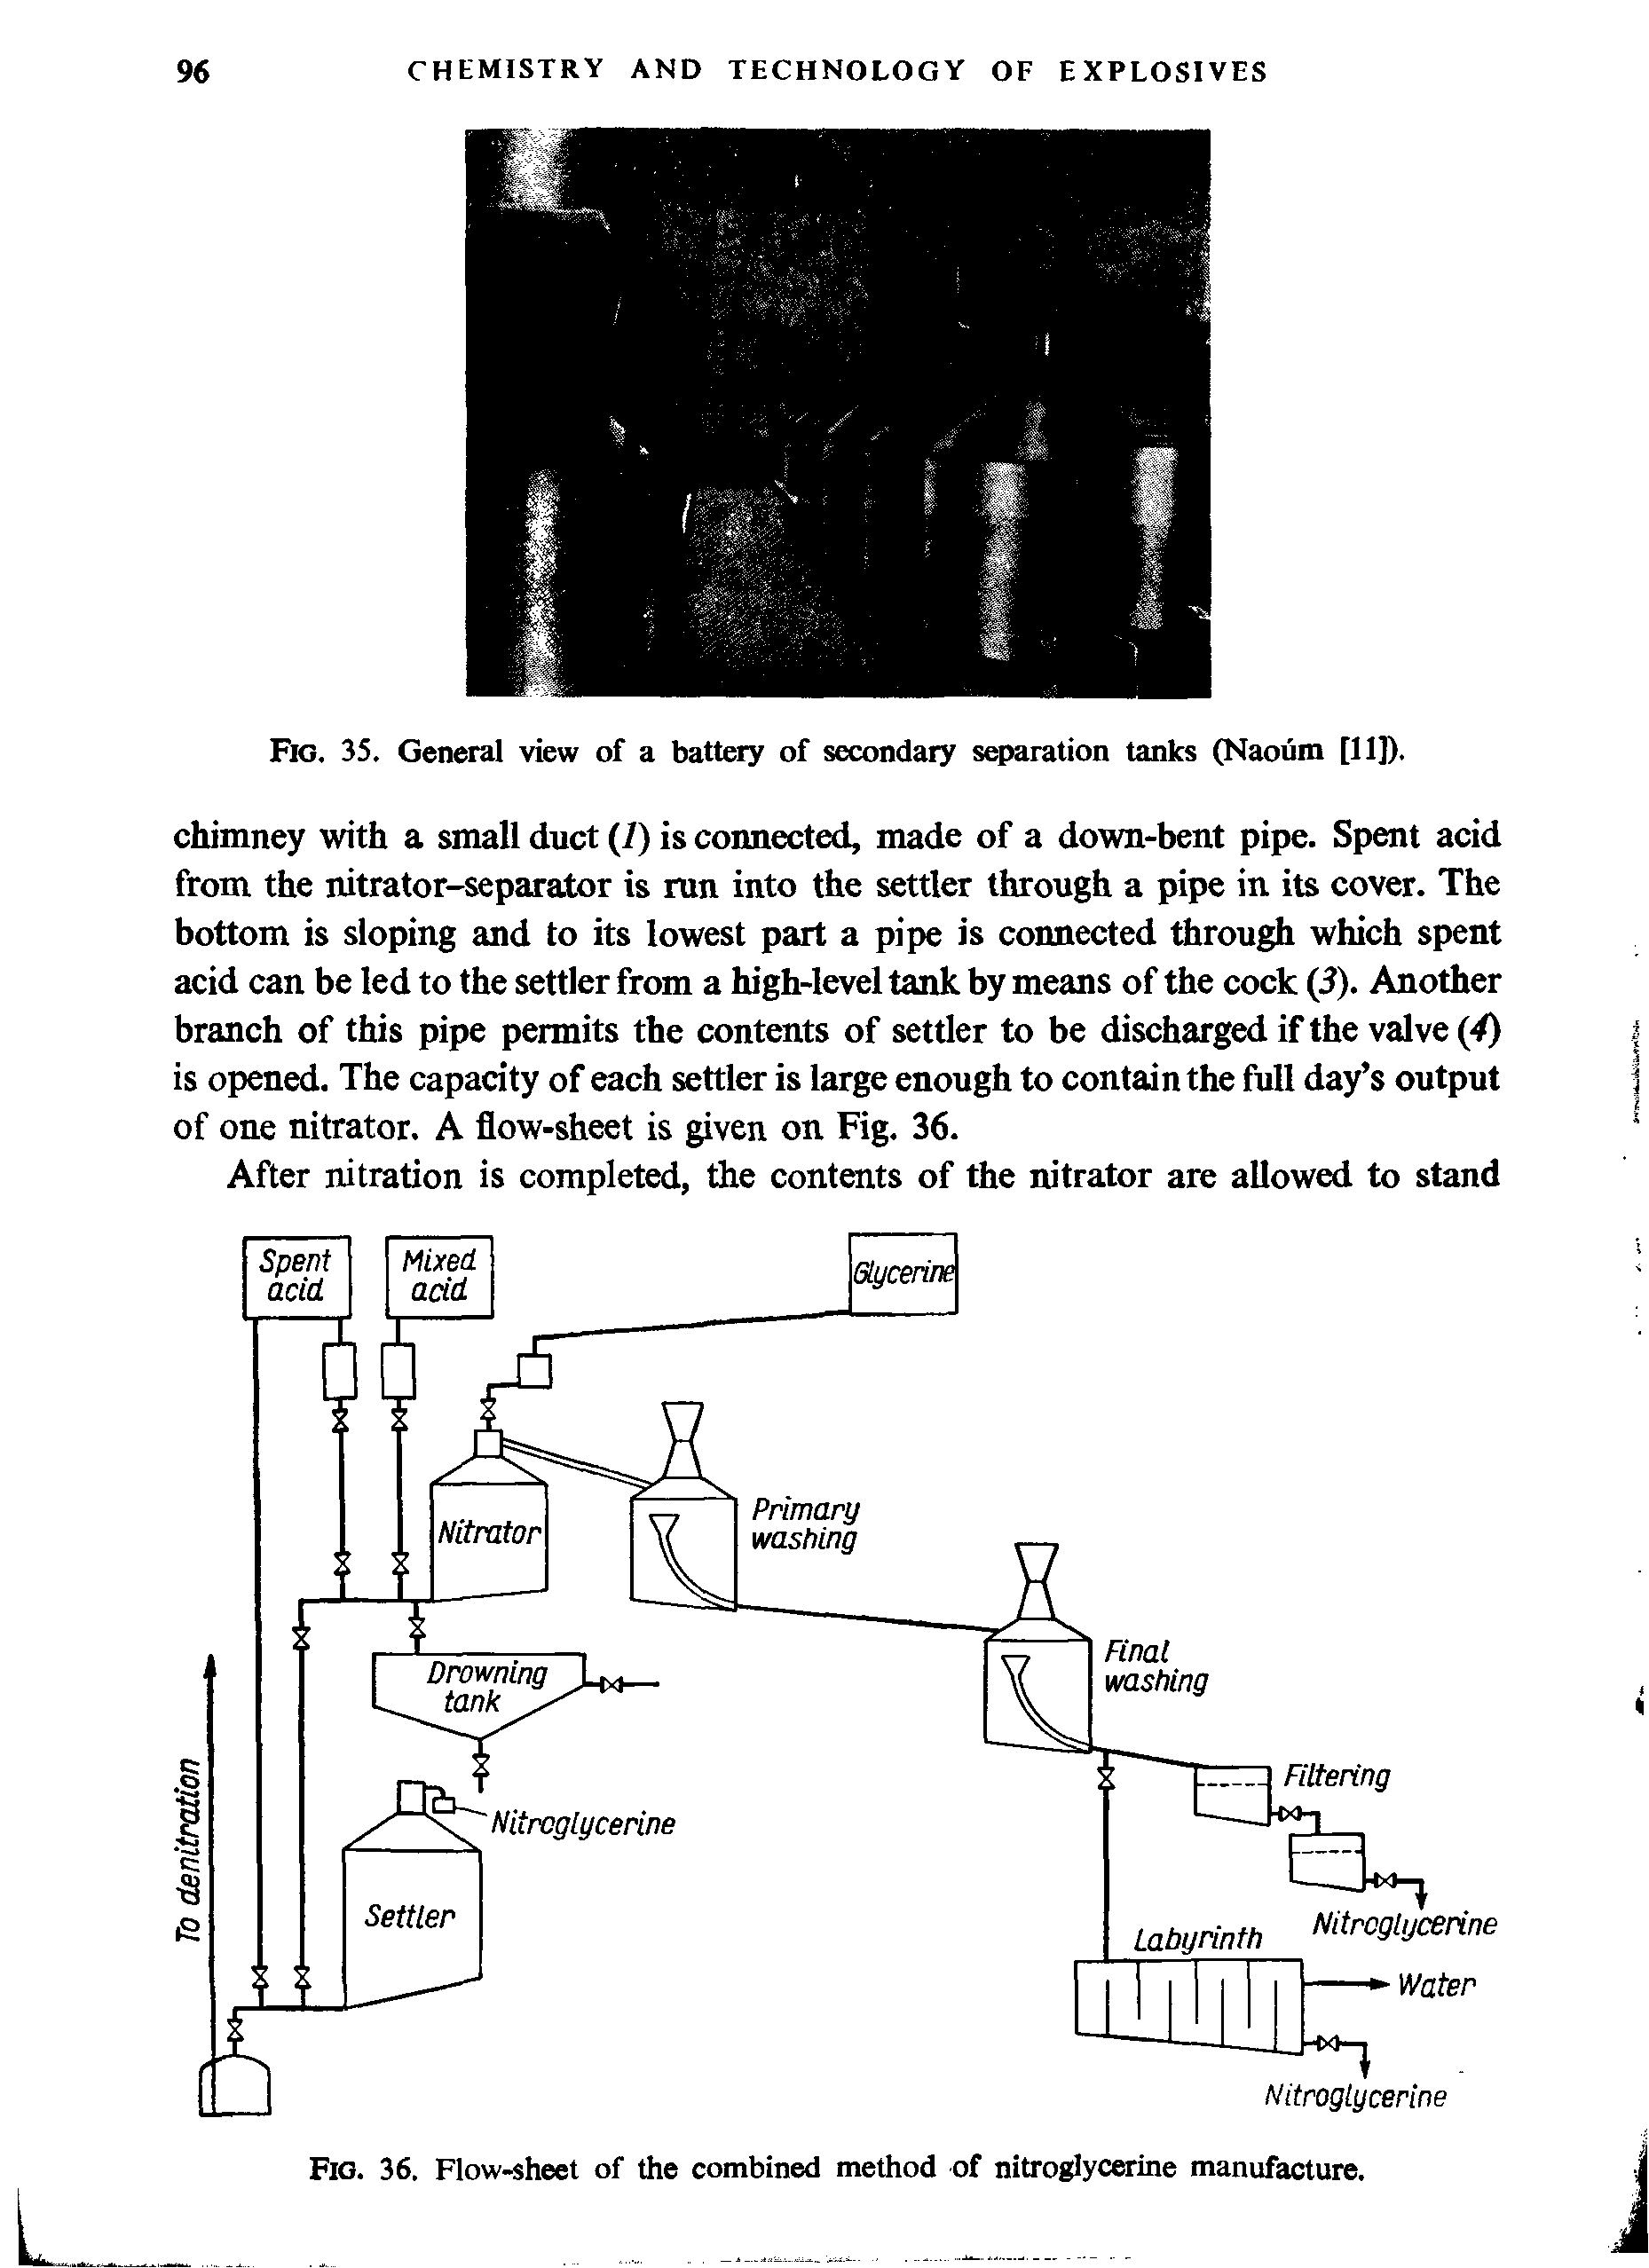 Fig. 35. General view of a battery of secondary separation tanks (Naoum [11]).